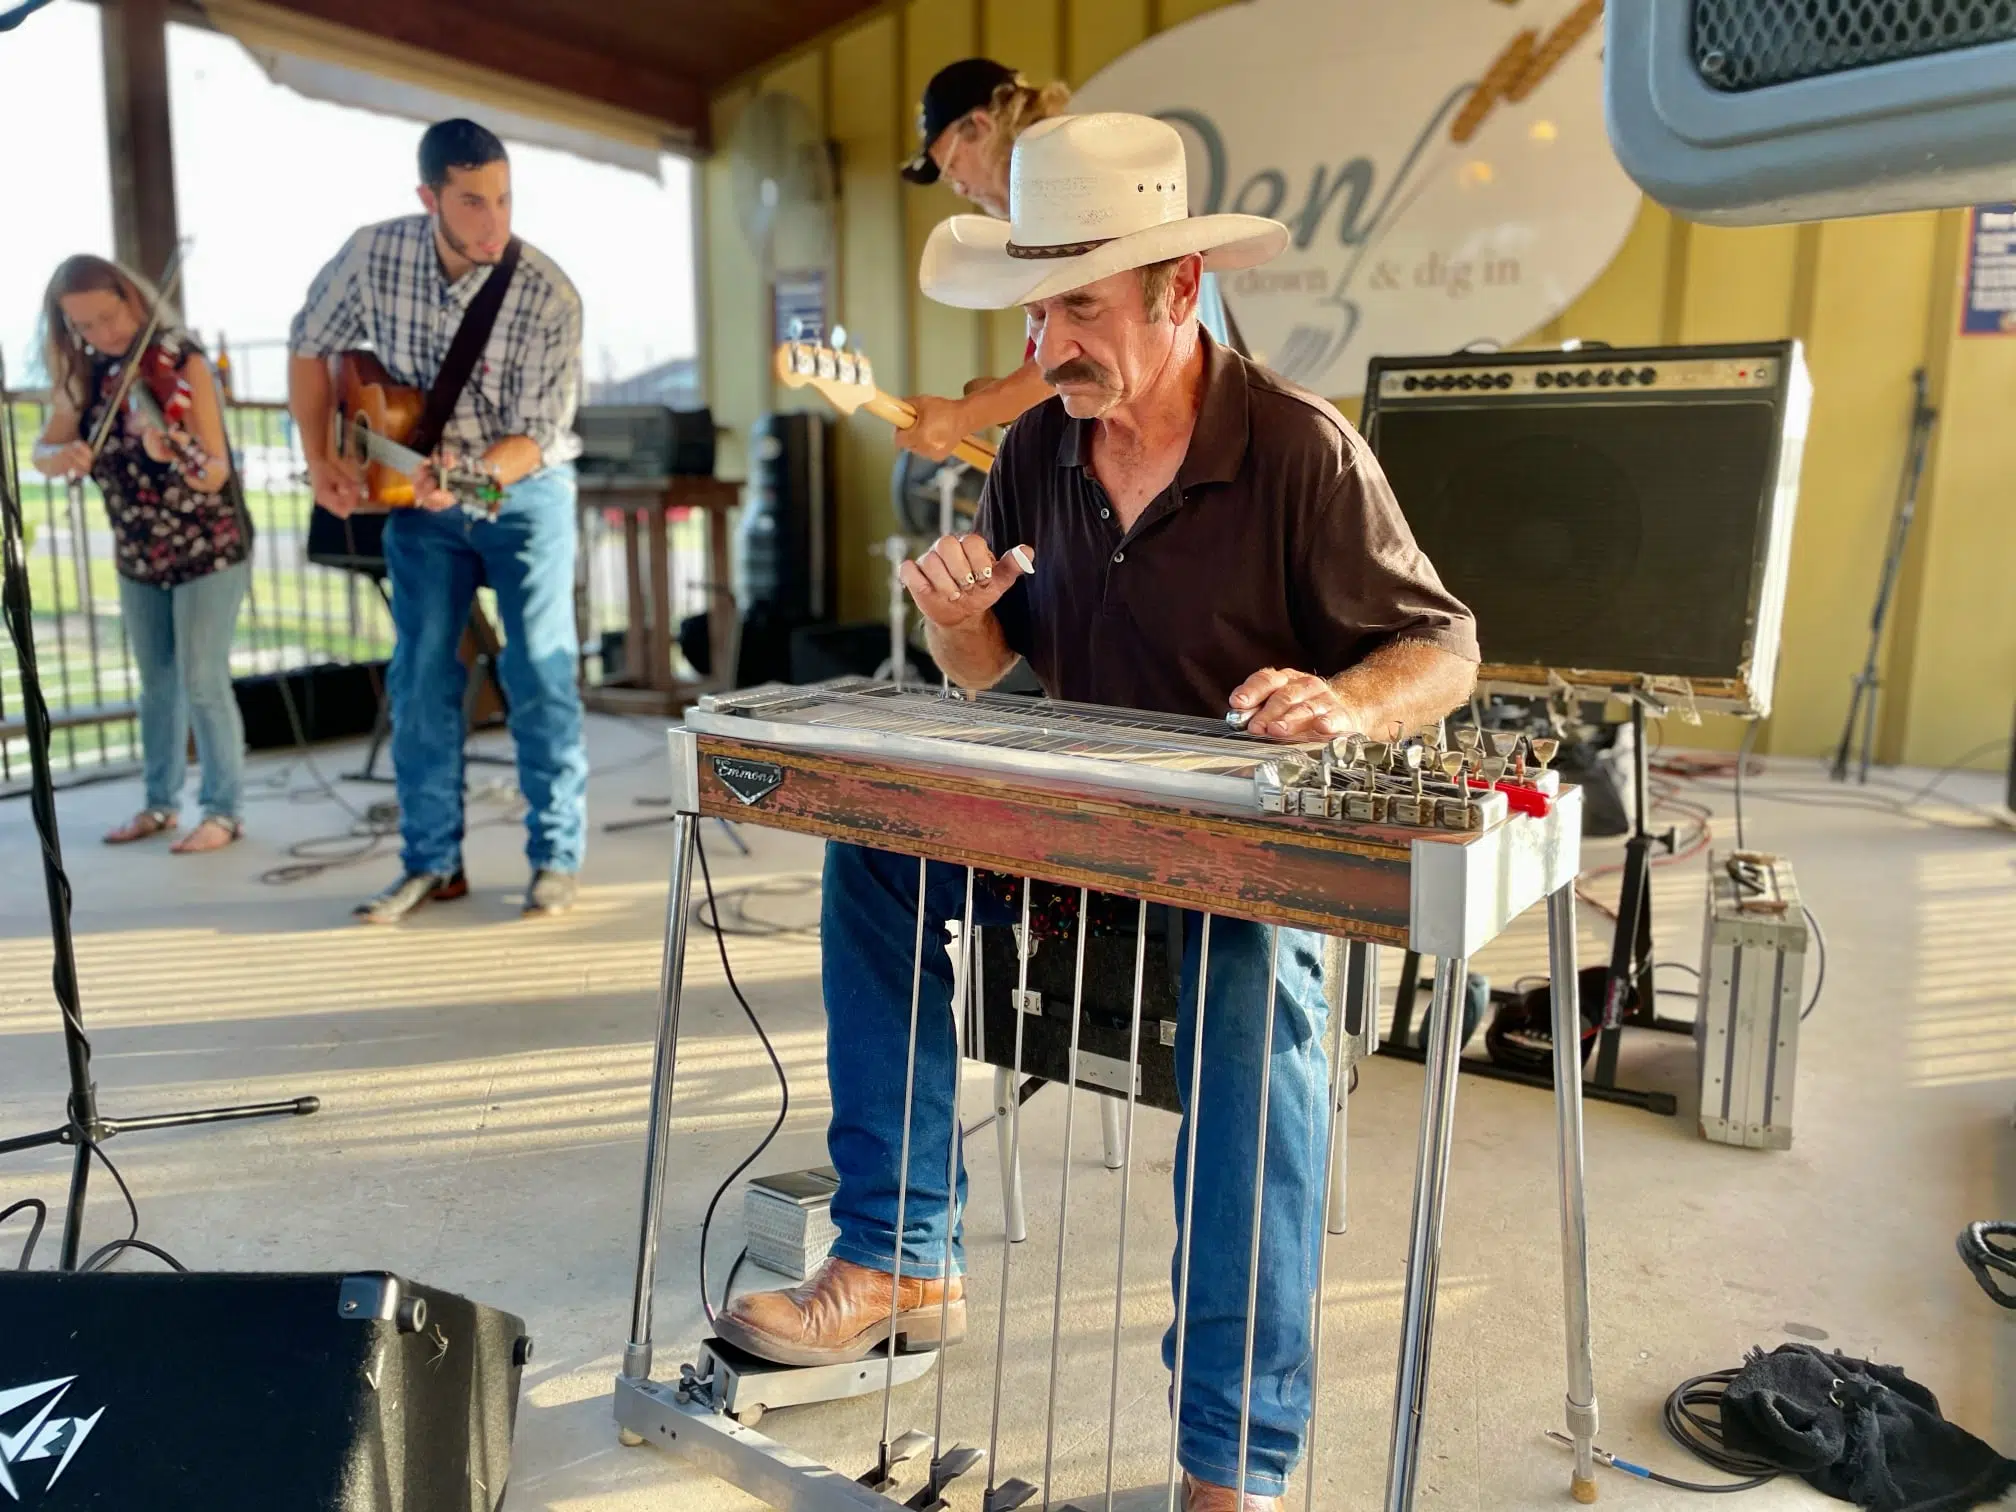 Summer concerts continue with the Gabe Galvan Band